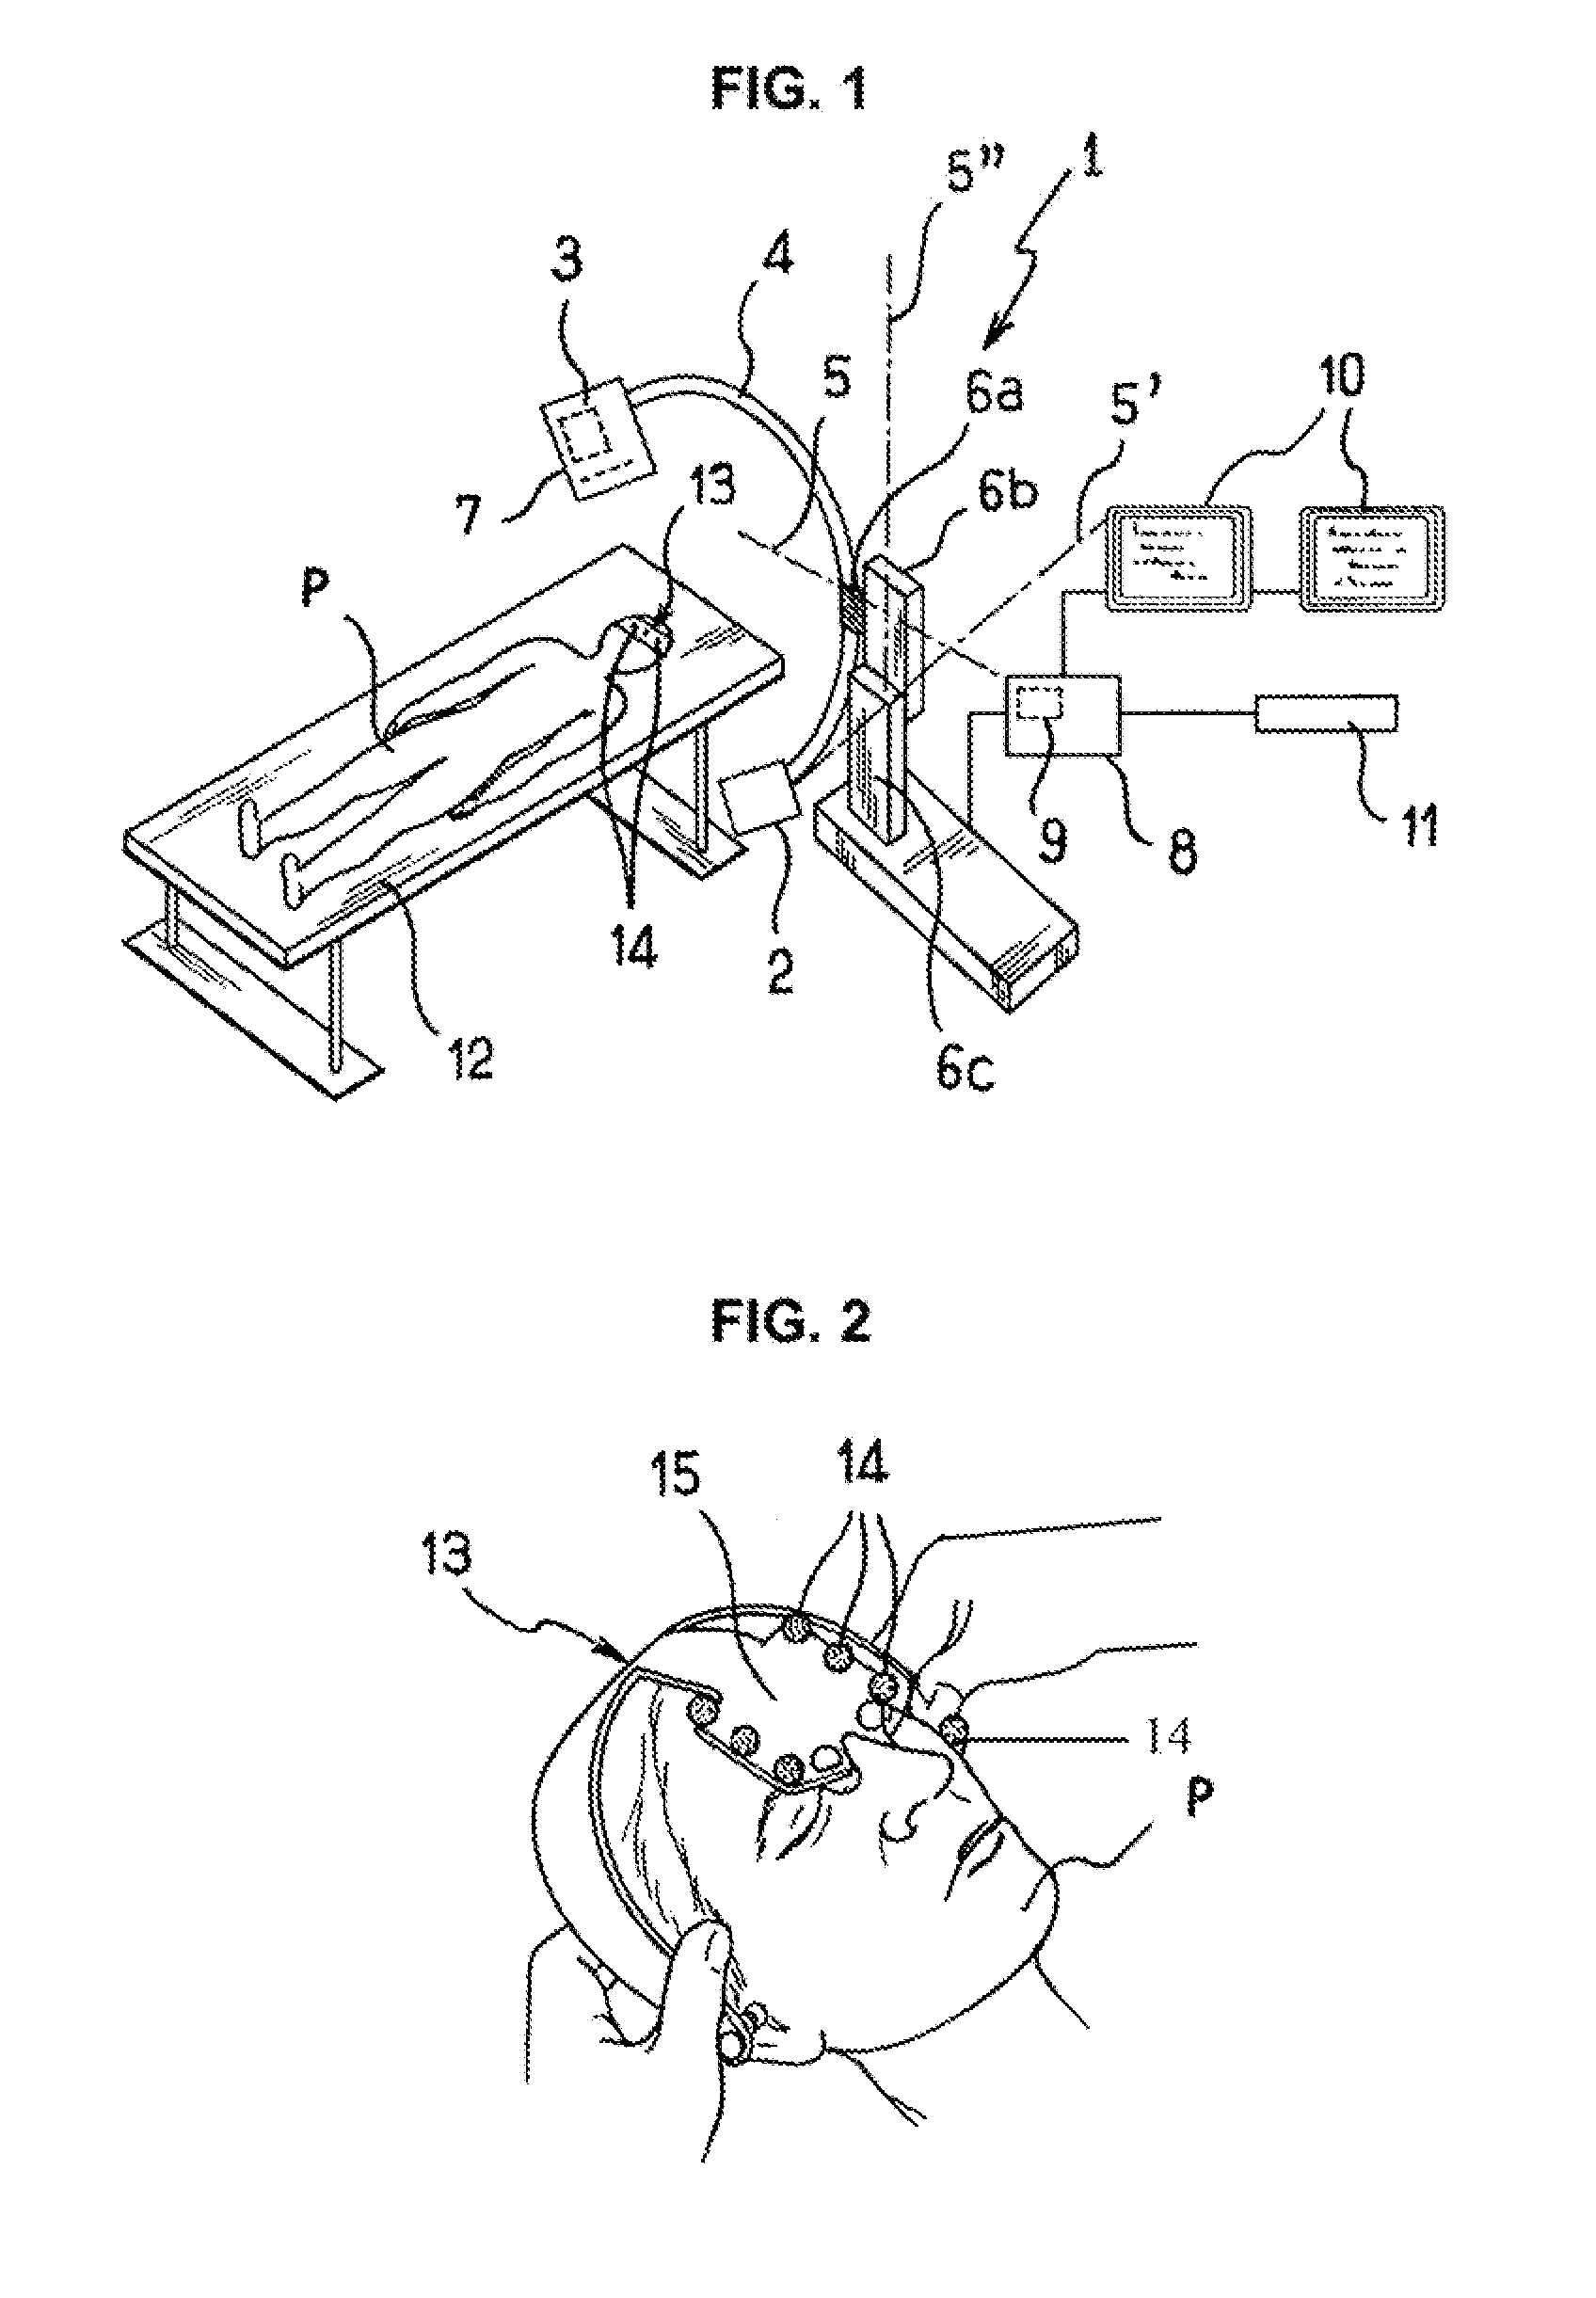 Method and apparatus for determining movement of an object in an imager